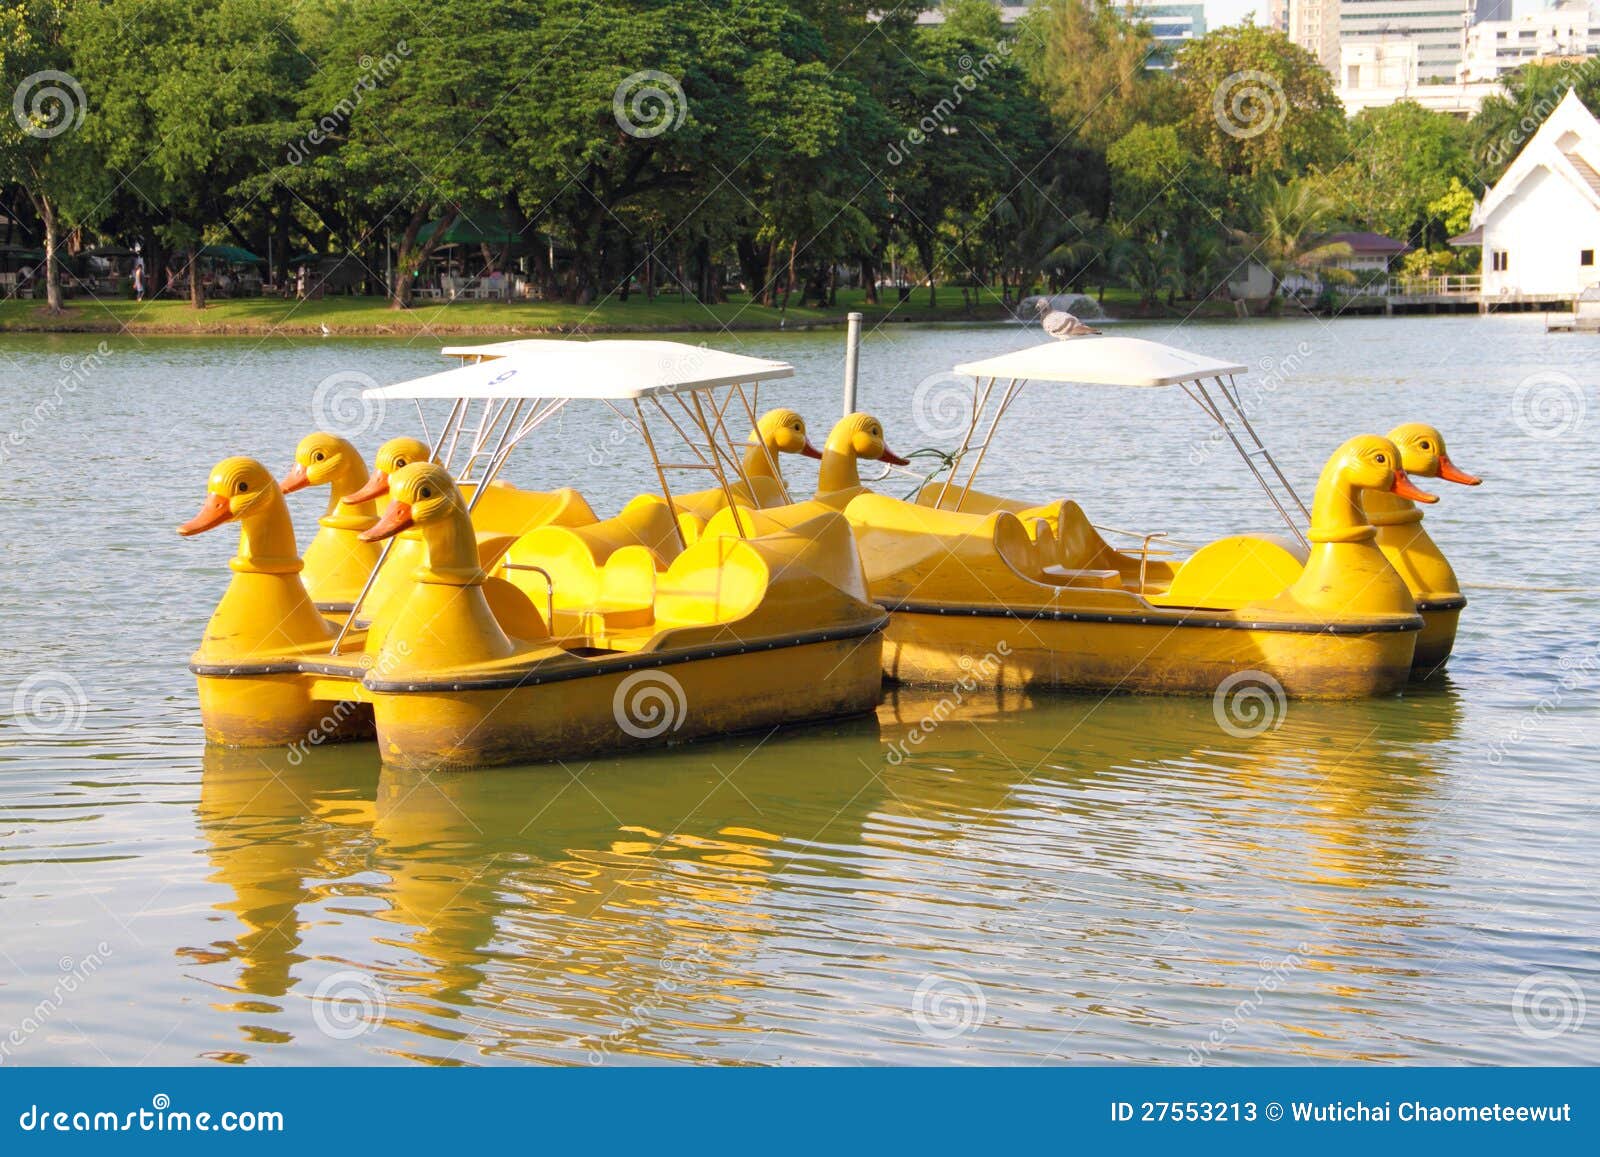 Duck Pedal Boat stock image. Image of nature, yellow 